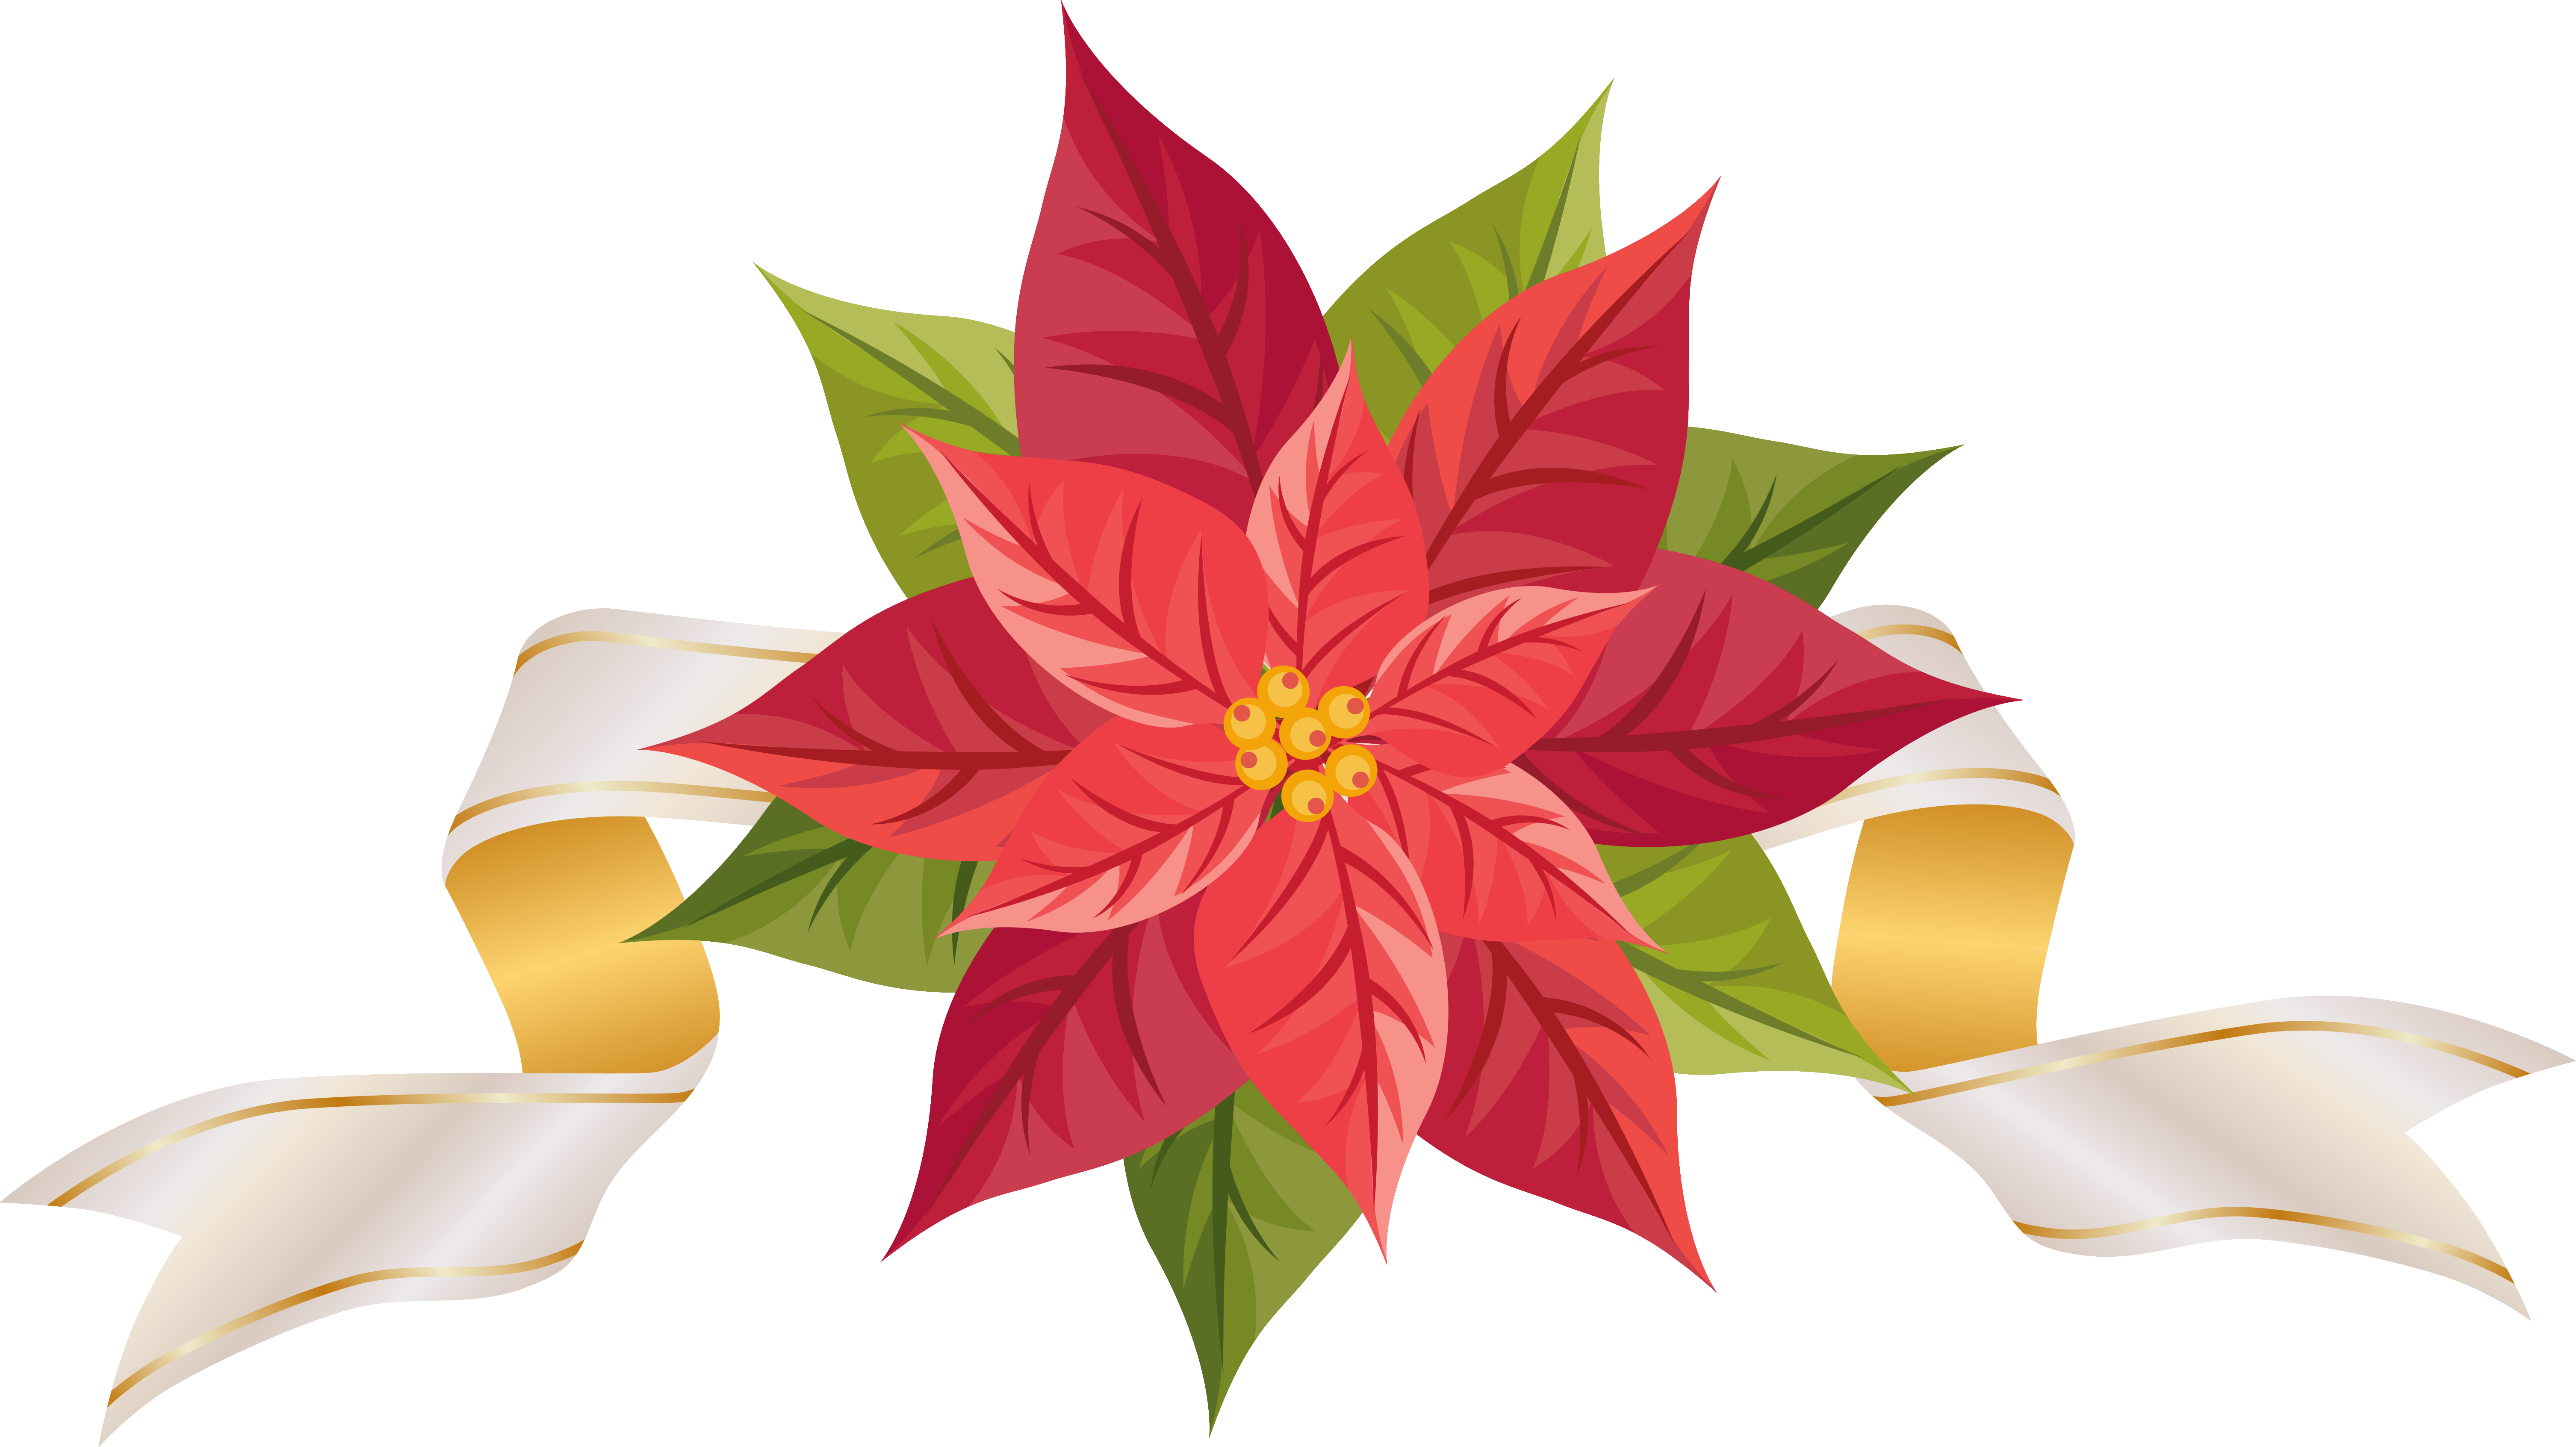 Clip Arts Related To : poinsettia. view all Poinsettia Cliparts). 